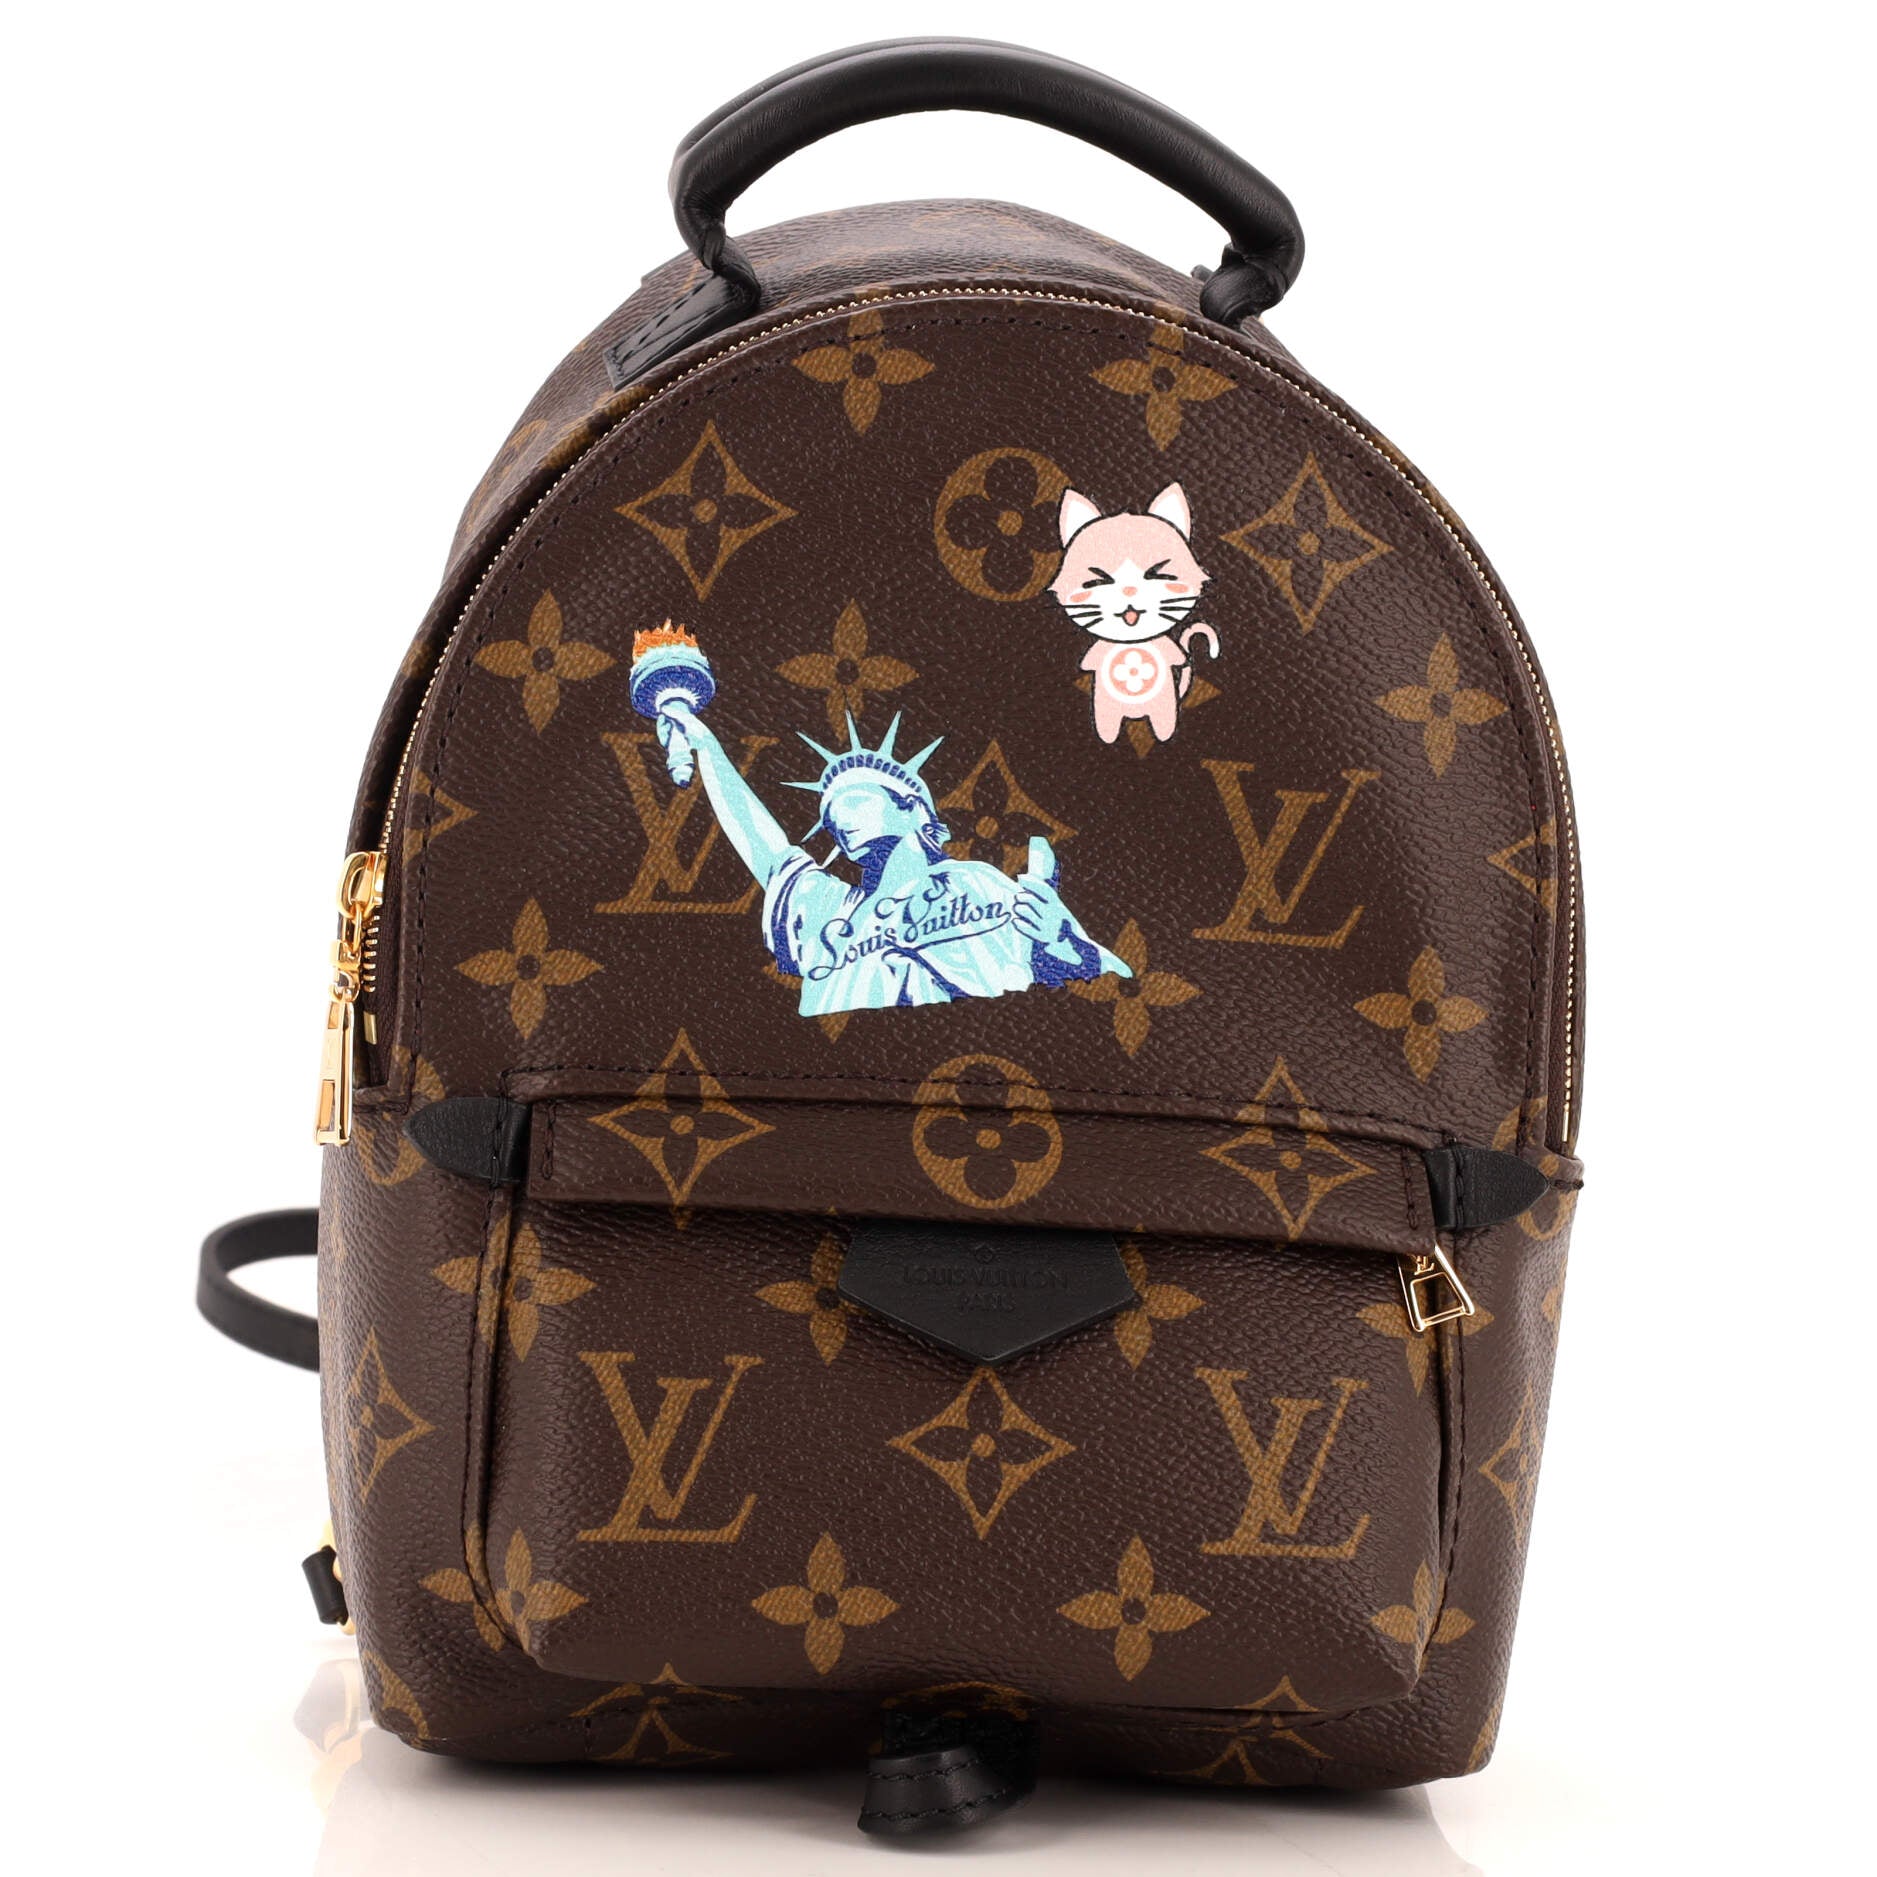 Palm Springs Backpack Limited Edition World Tour Monogram Canvas Mini